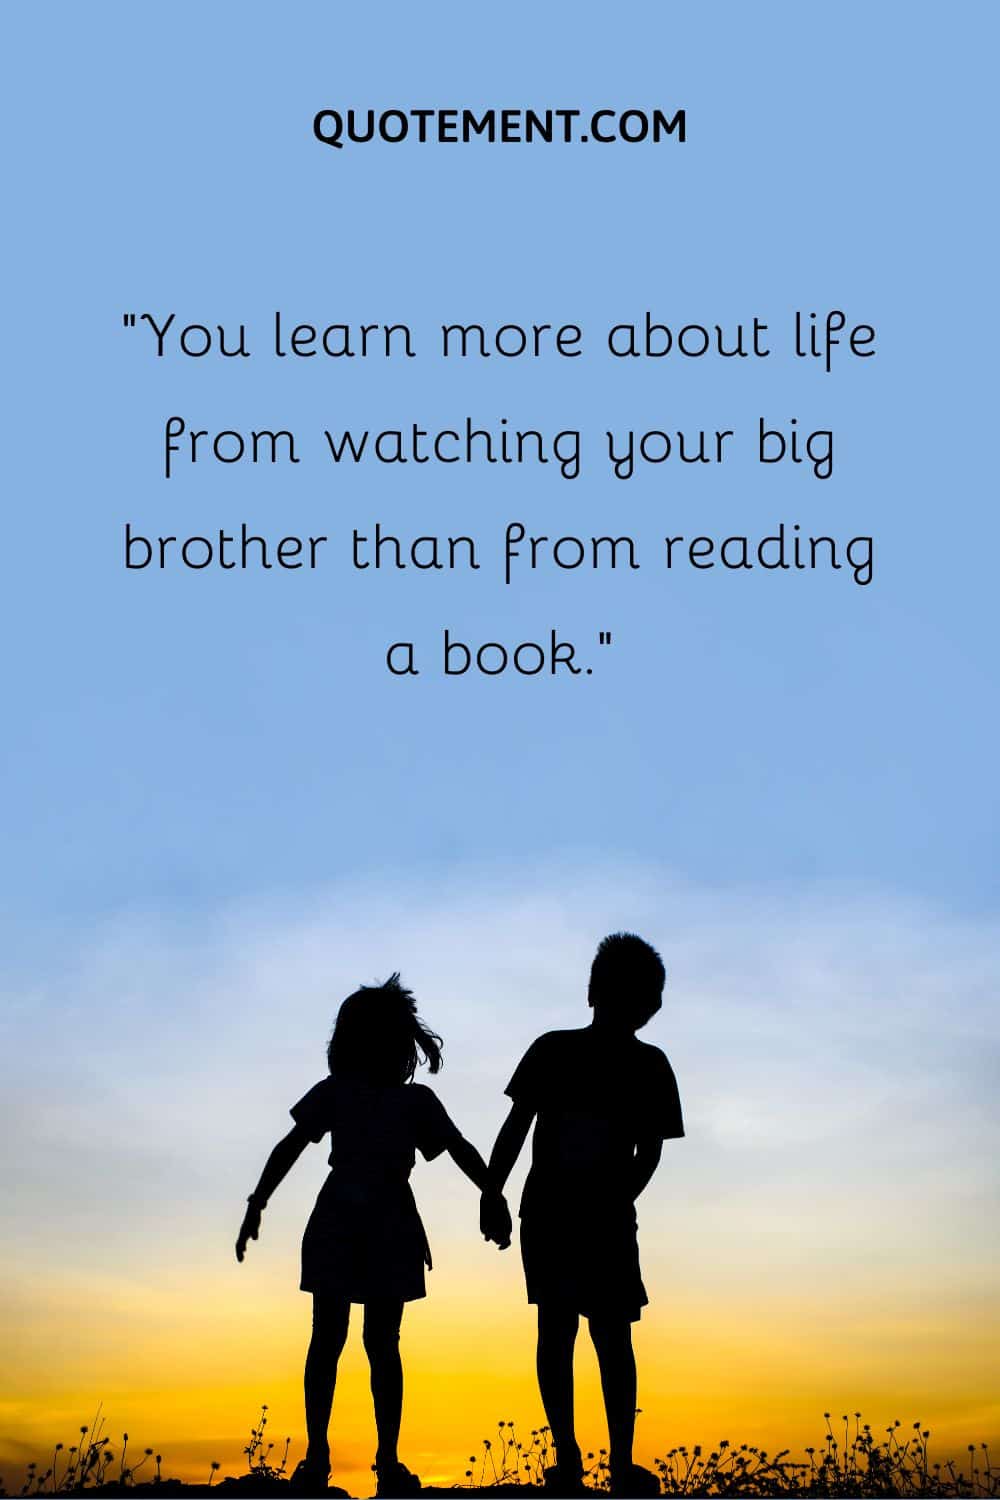 “You learn more about life from watching your big brother than from reading a book.”